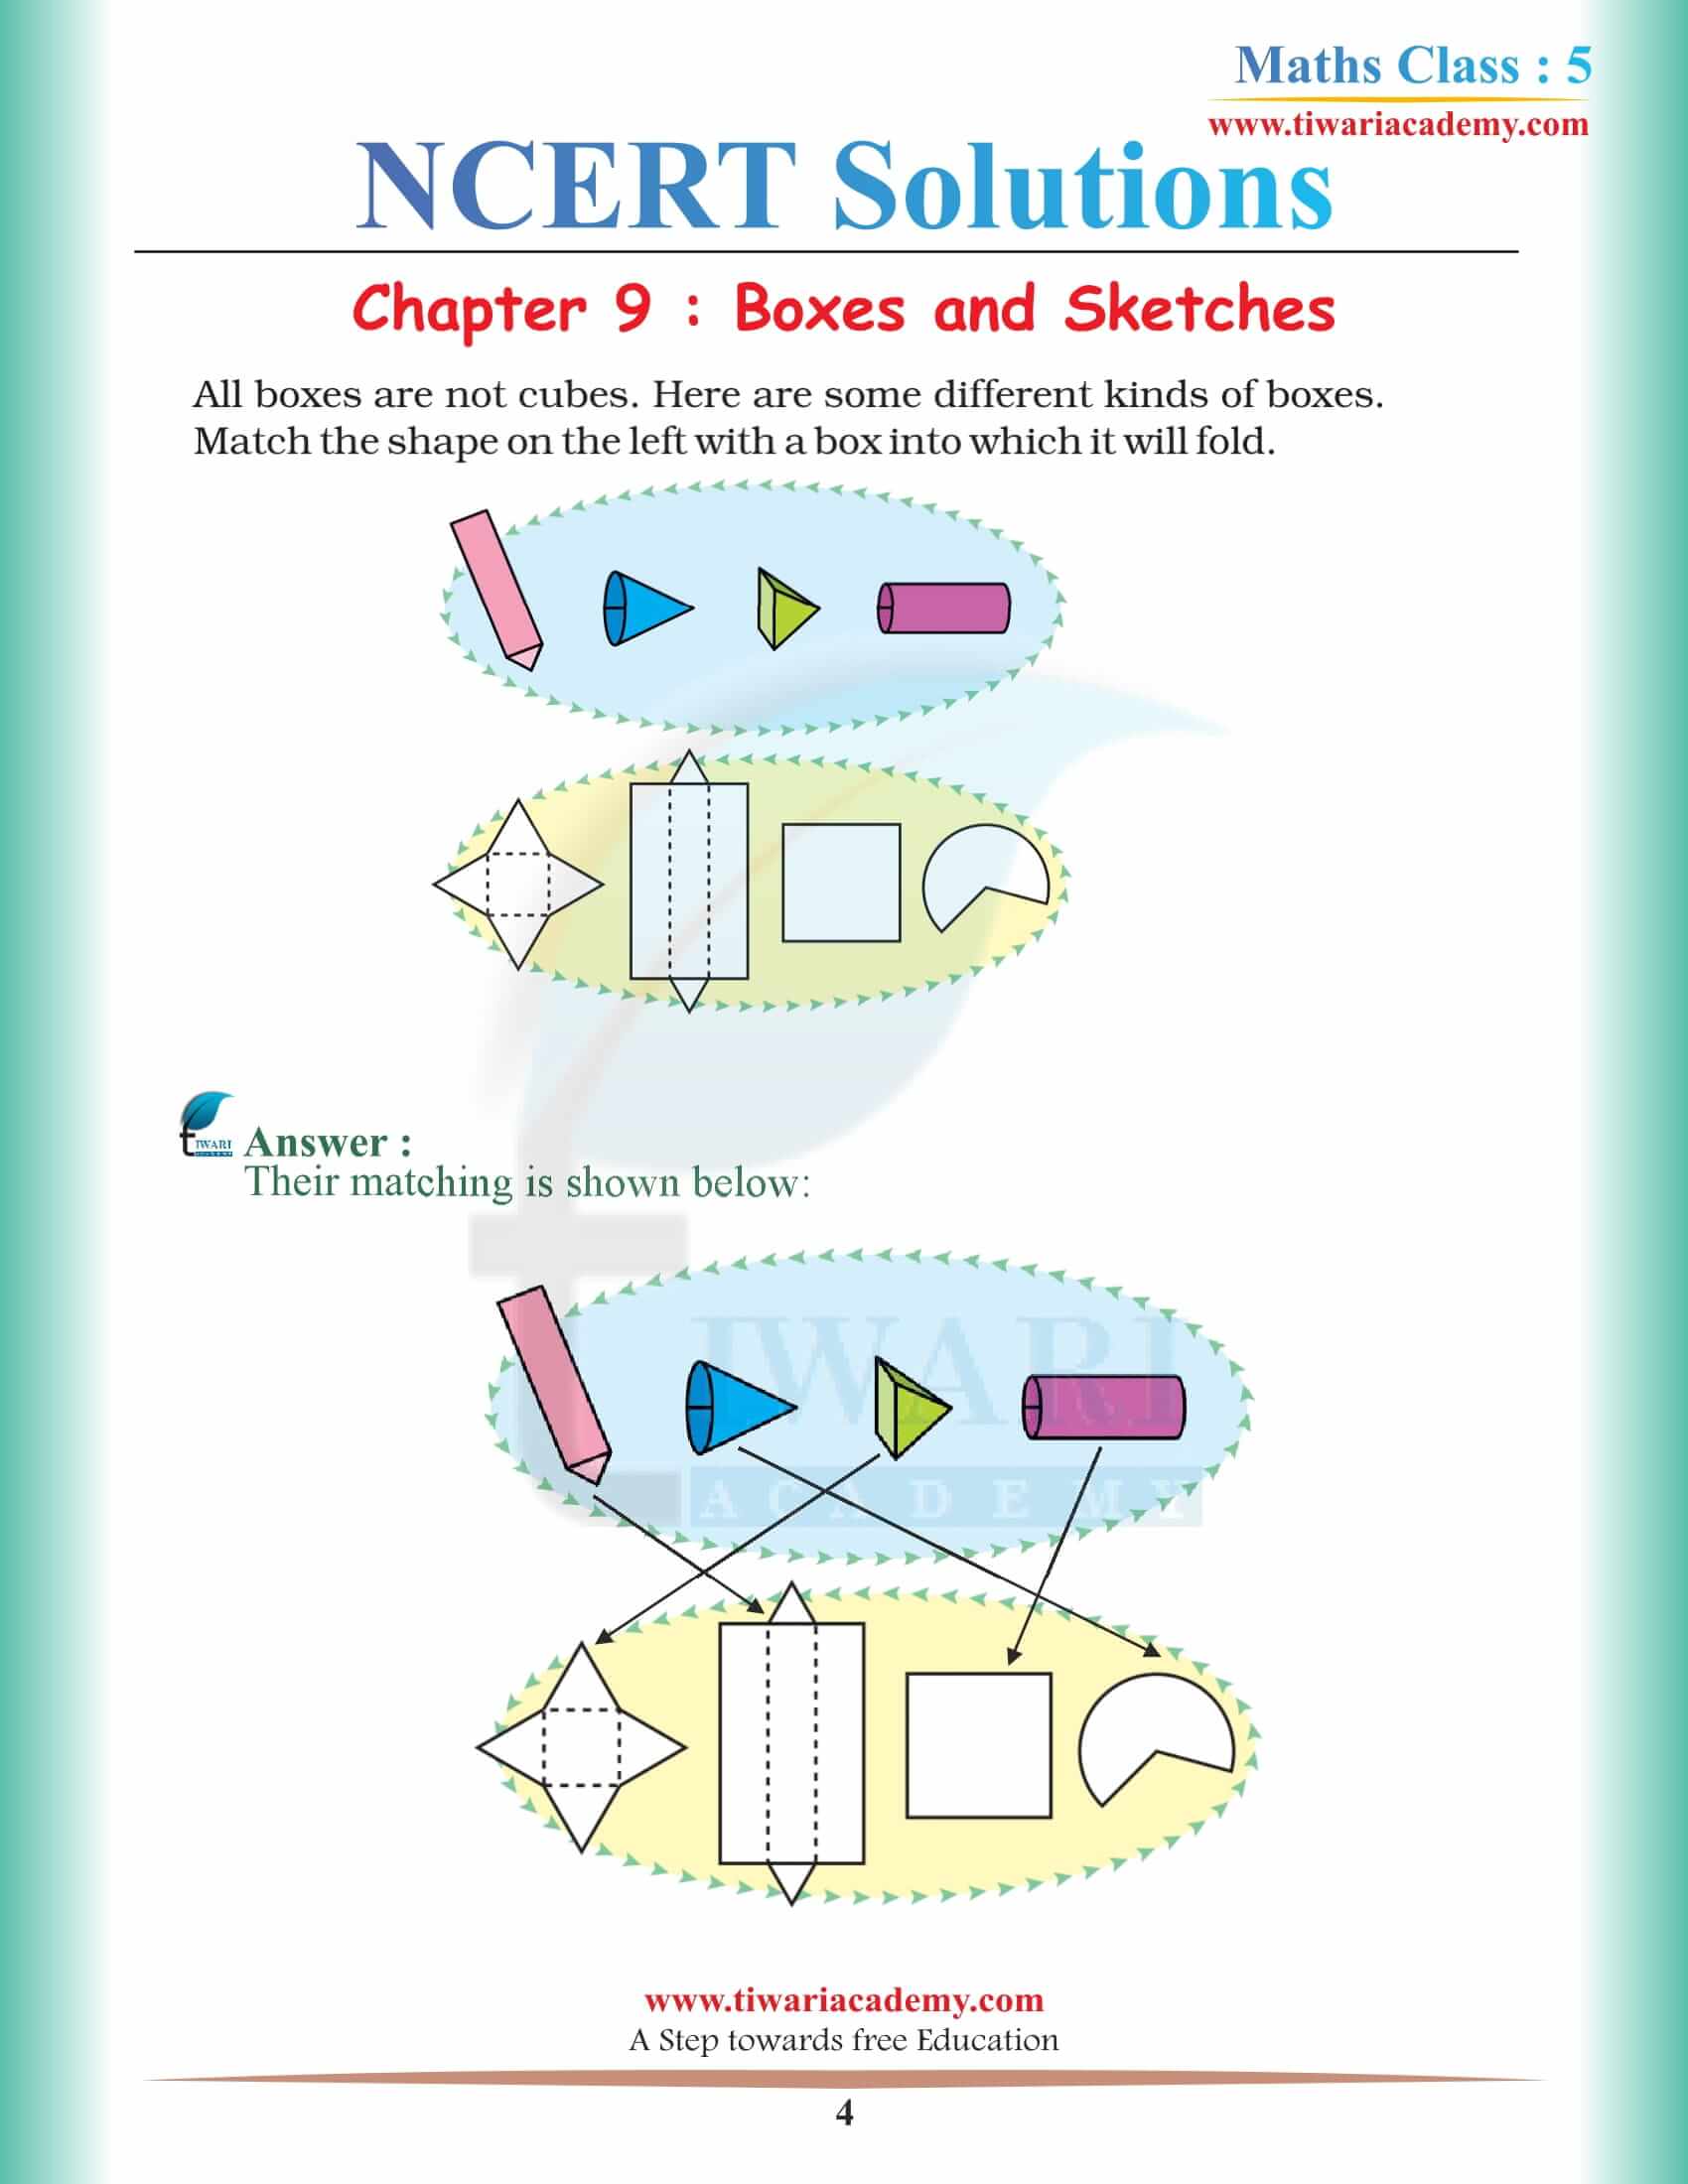 NCERT Solutions for Class 5 Maths Chapter 9 free download